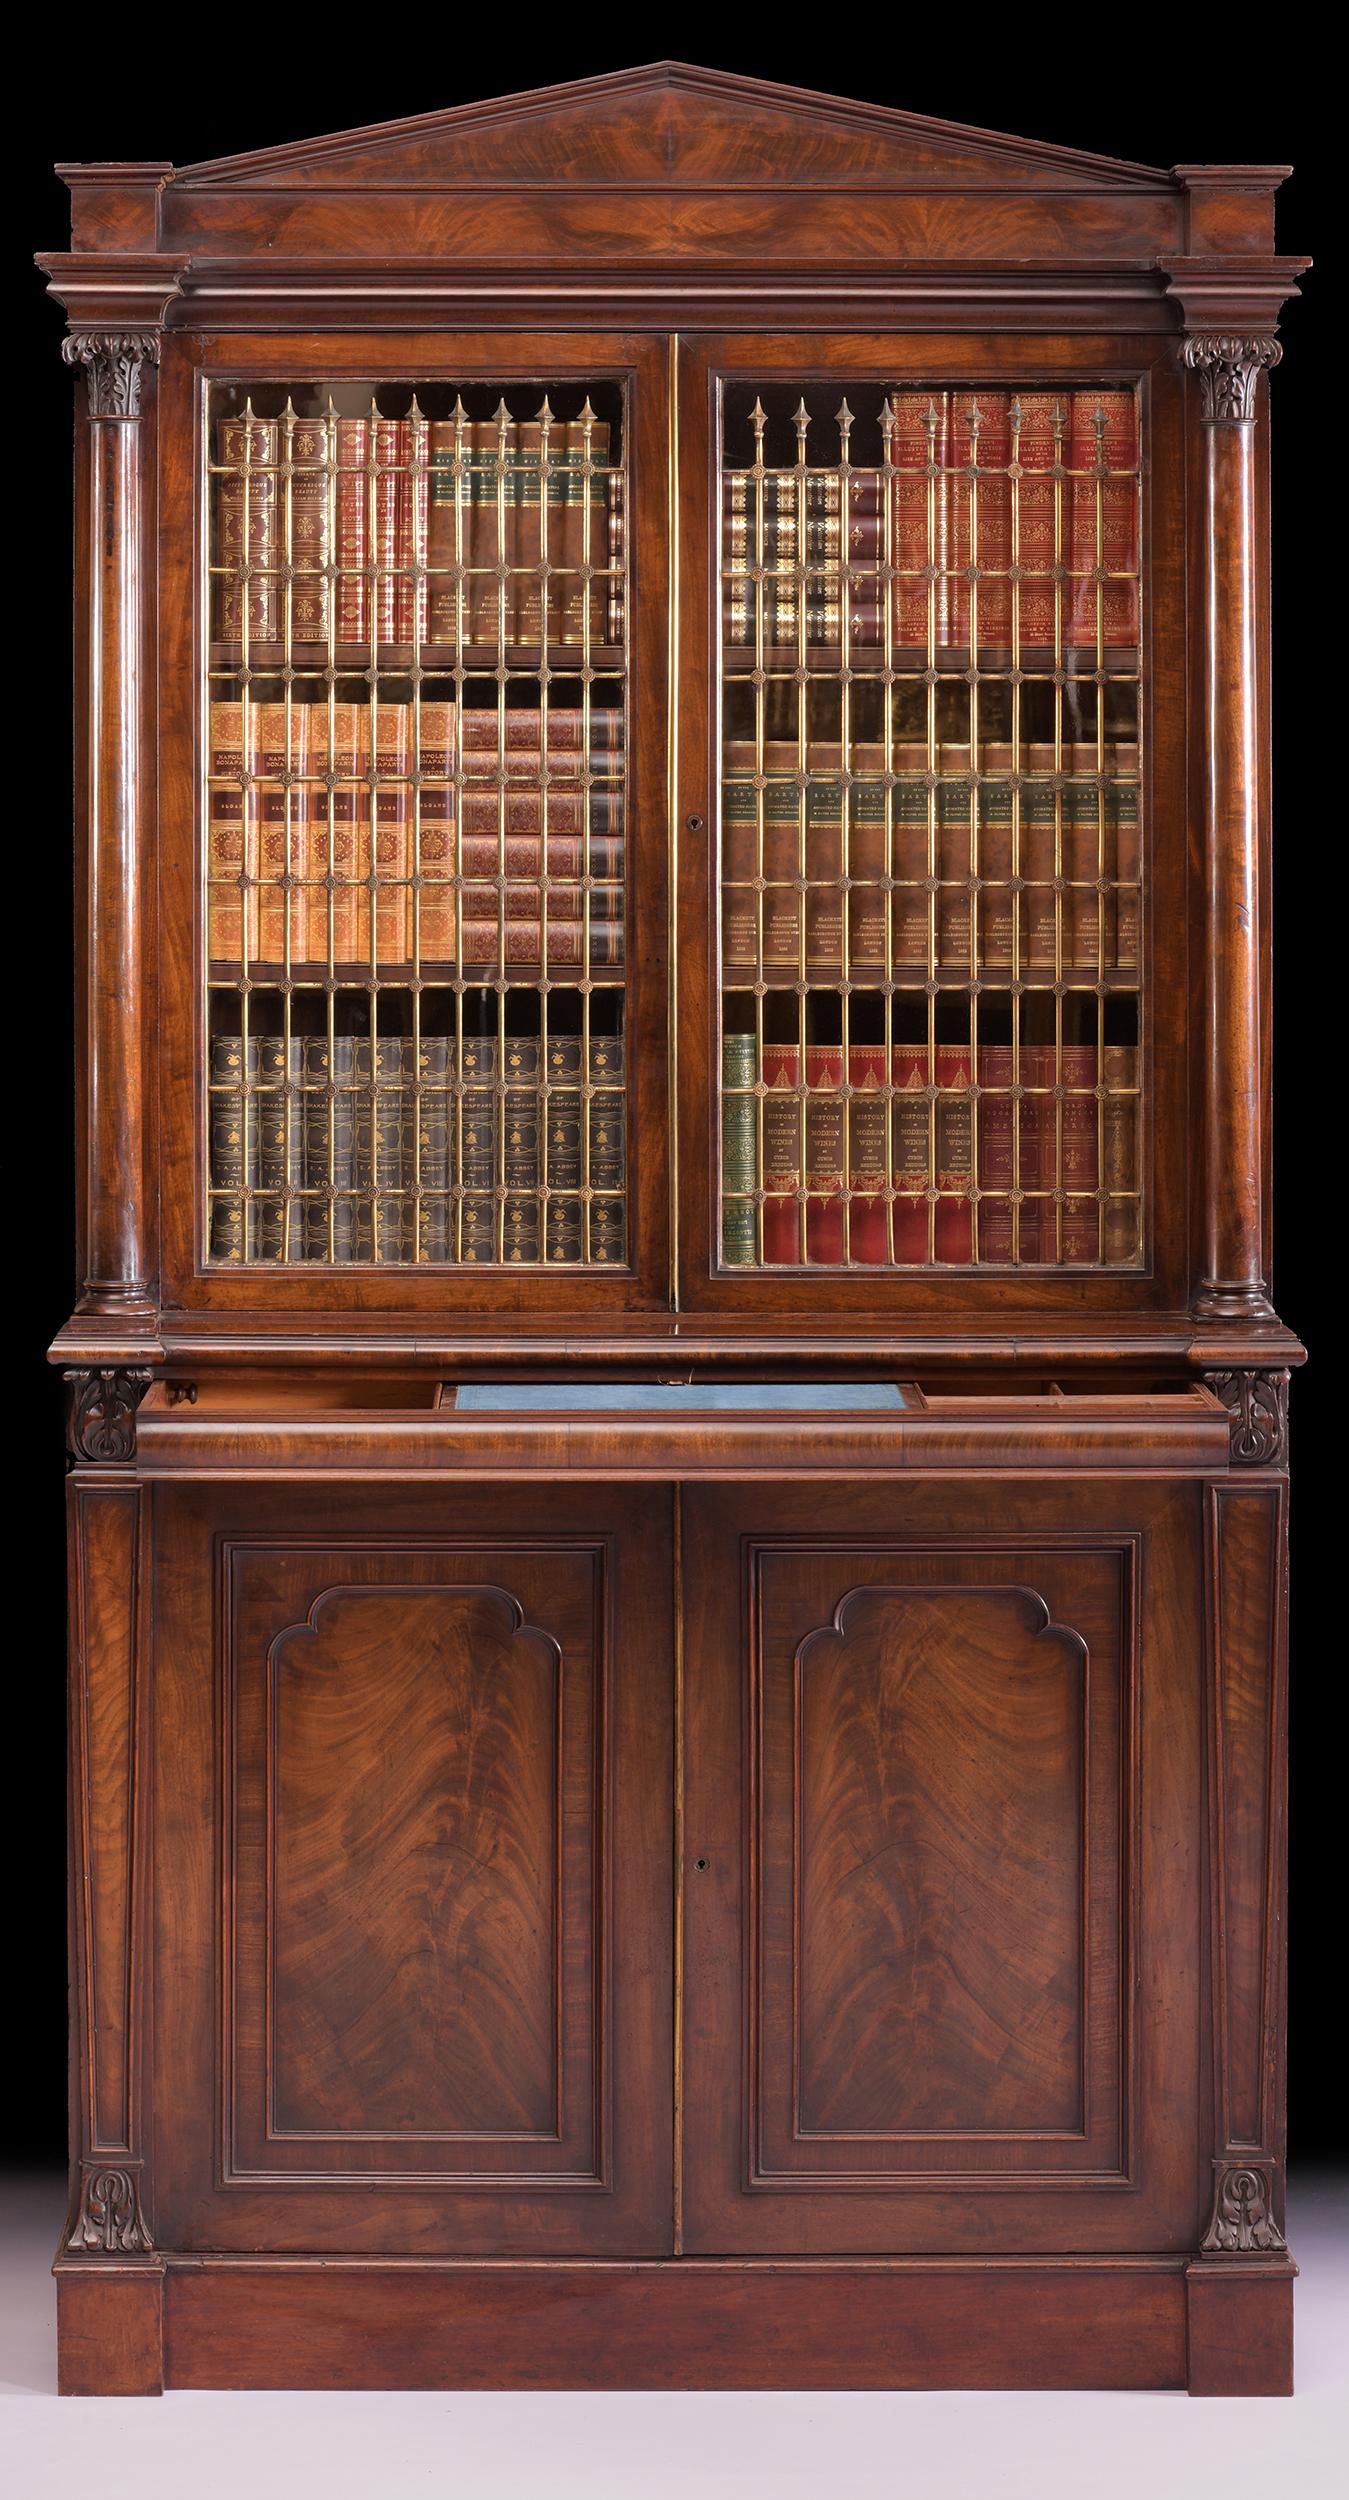 Early 19th Century Pair of English Regency Mahogany Architectural Bookcases by Gillows of Lancaster